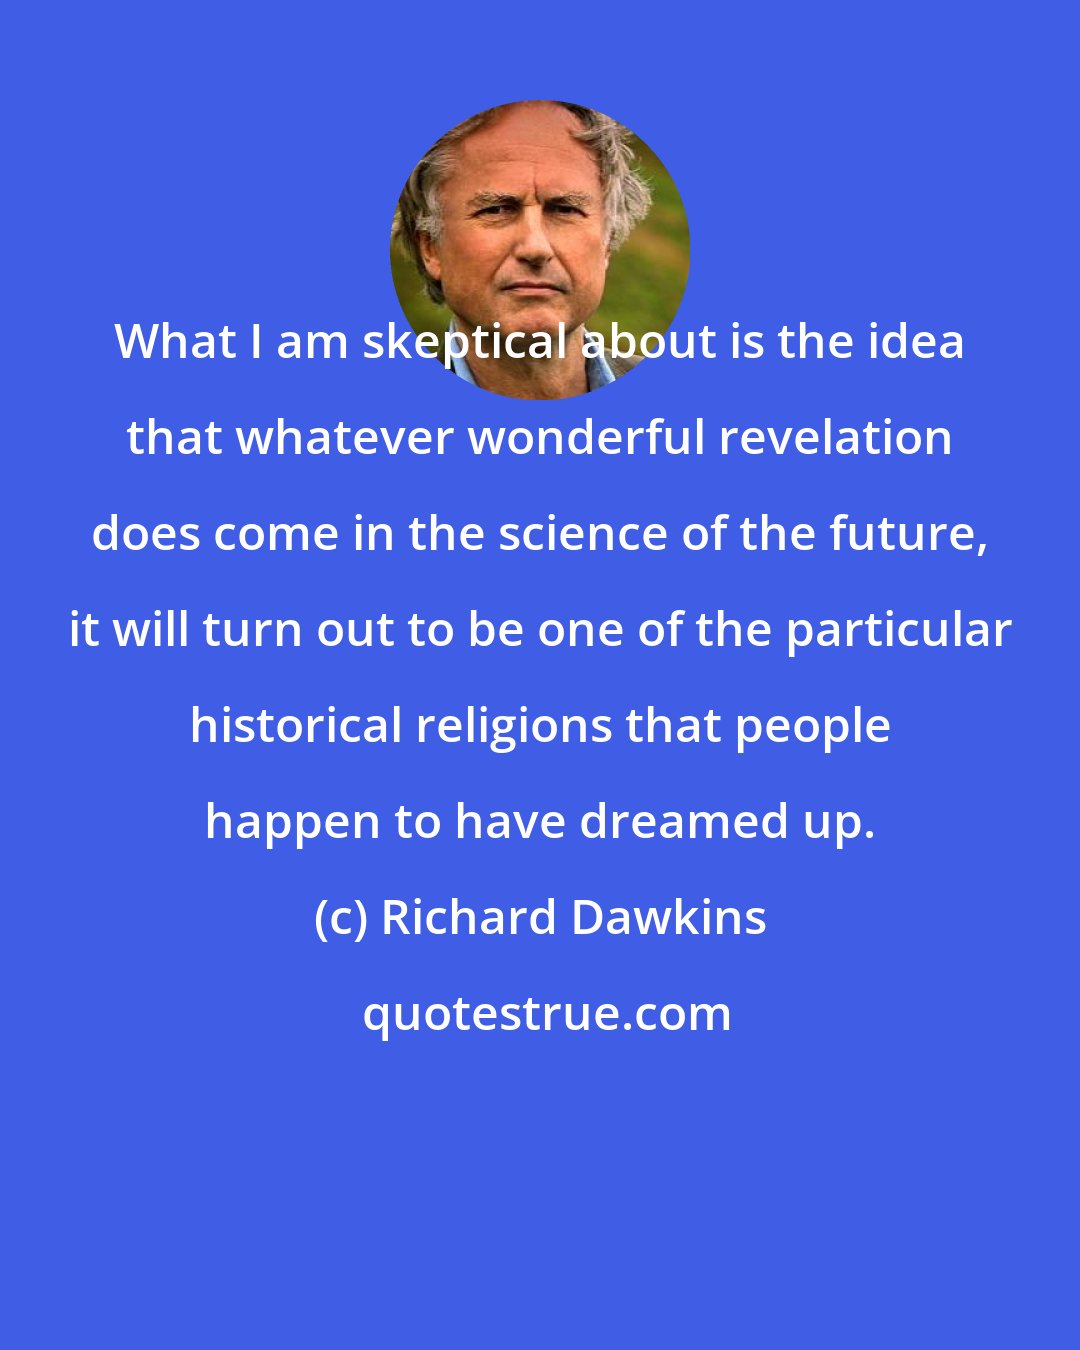 Richard Dawkins: What I am skeptical about is the idea that whatever wonderful revelation does come in the science of the future, it will turn out to be one of the particular historical religions that people happen to have dreamed up.